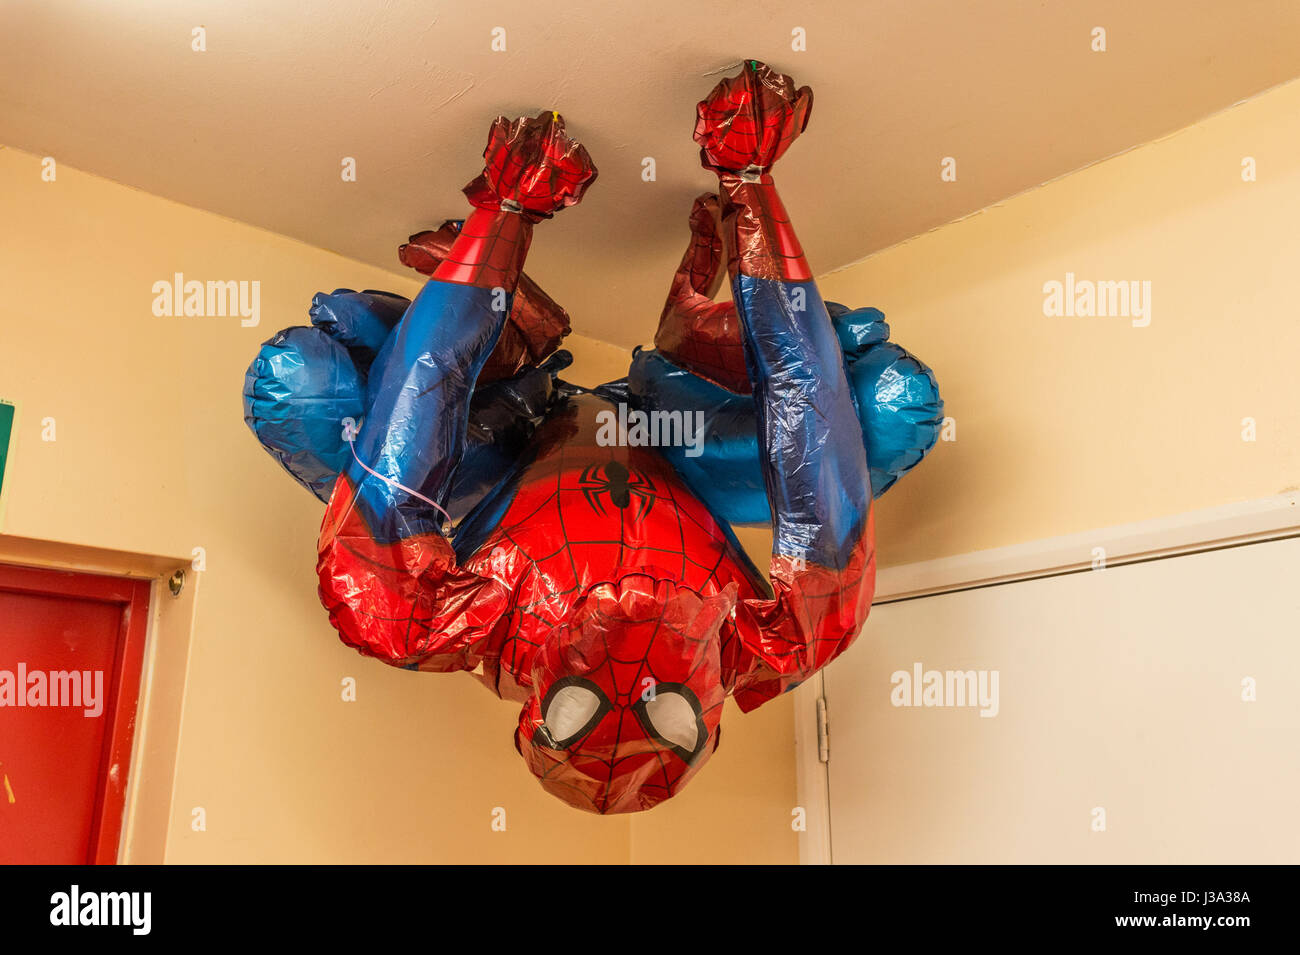 Spiderman on the ceiling Stock Photo